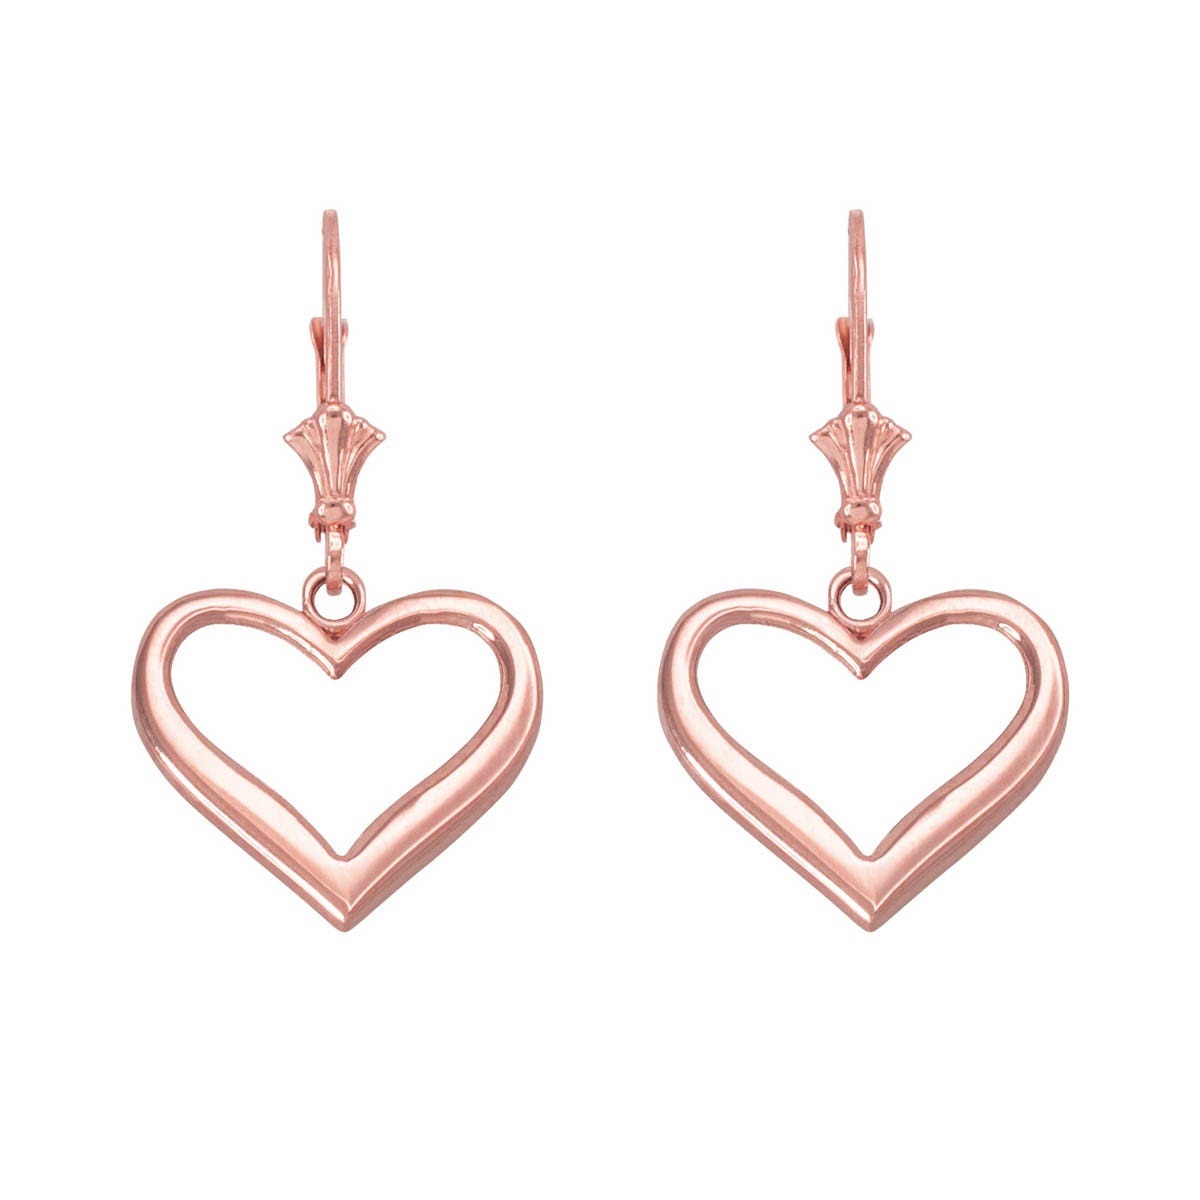 Gold Boutique - Gents Earrings in Rose GOOFASH